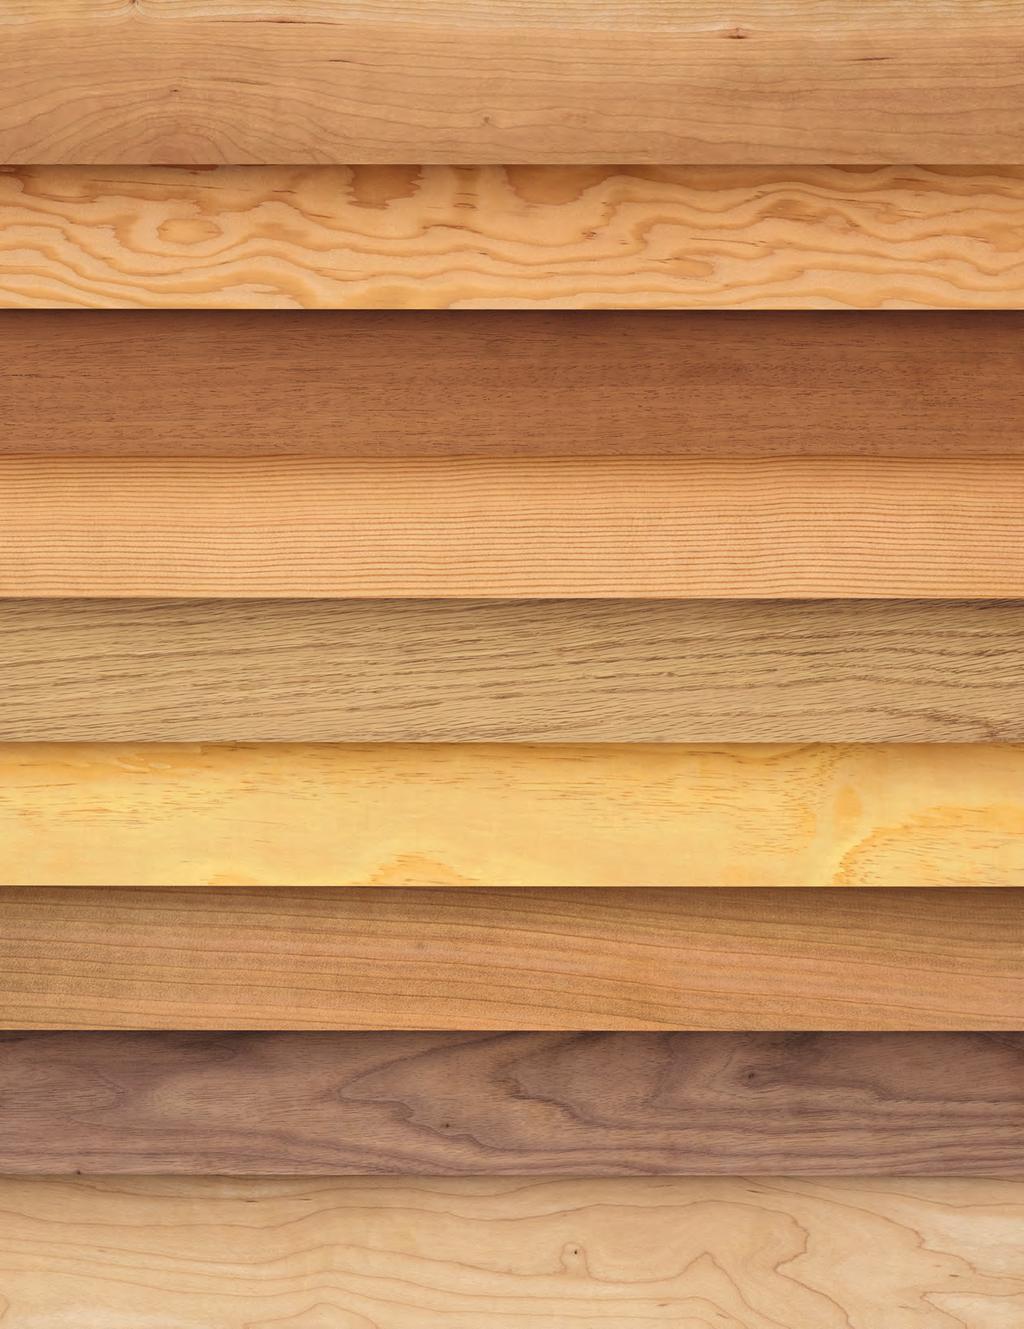 52 WOOD SPECIES Marvin makes it easy to complement any project or design with an array of high-quality wood options. Marvin is committed to environmentally responsible forest management.